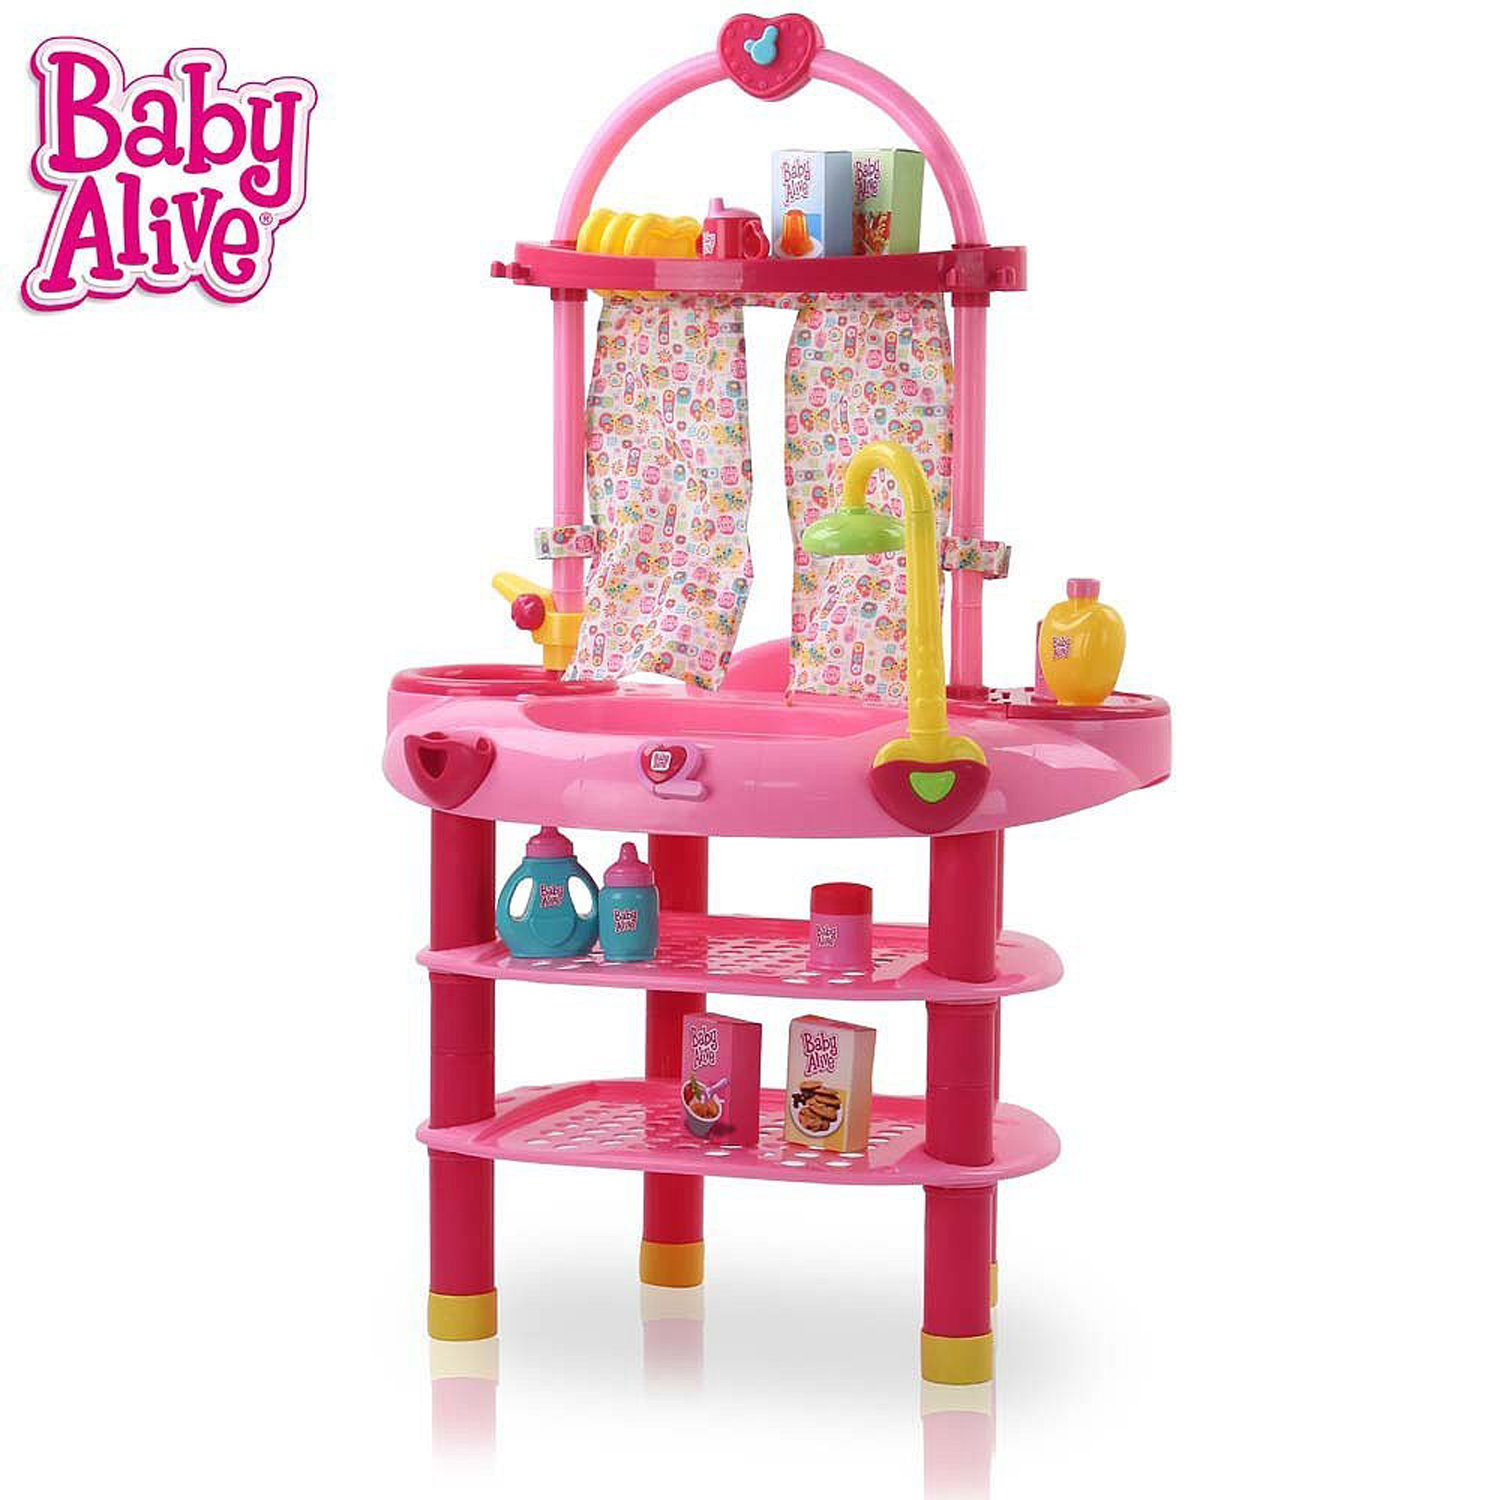 Baby Alive Doll 3 in 1 Cook ?n Care Play Set - image 4 of 8